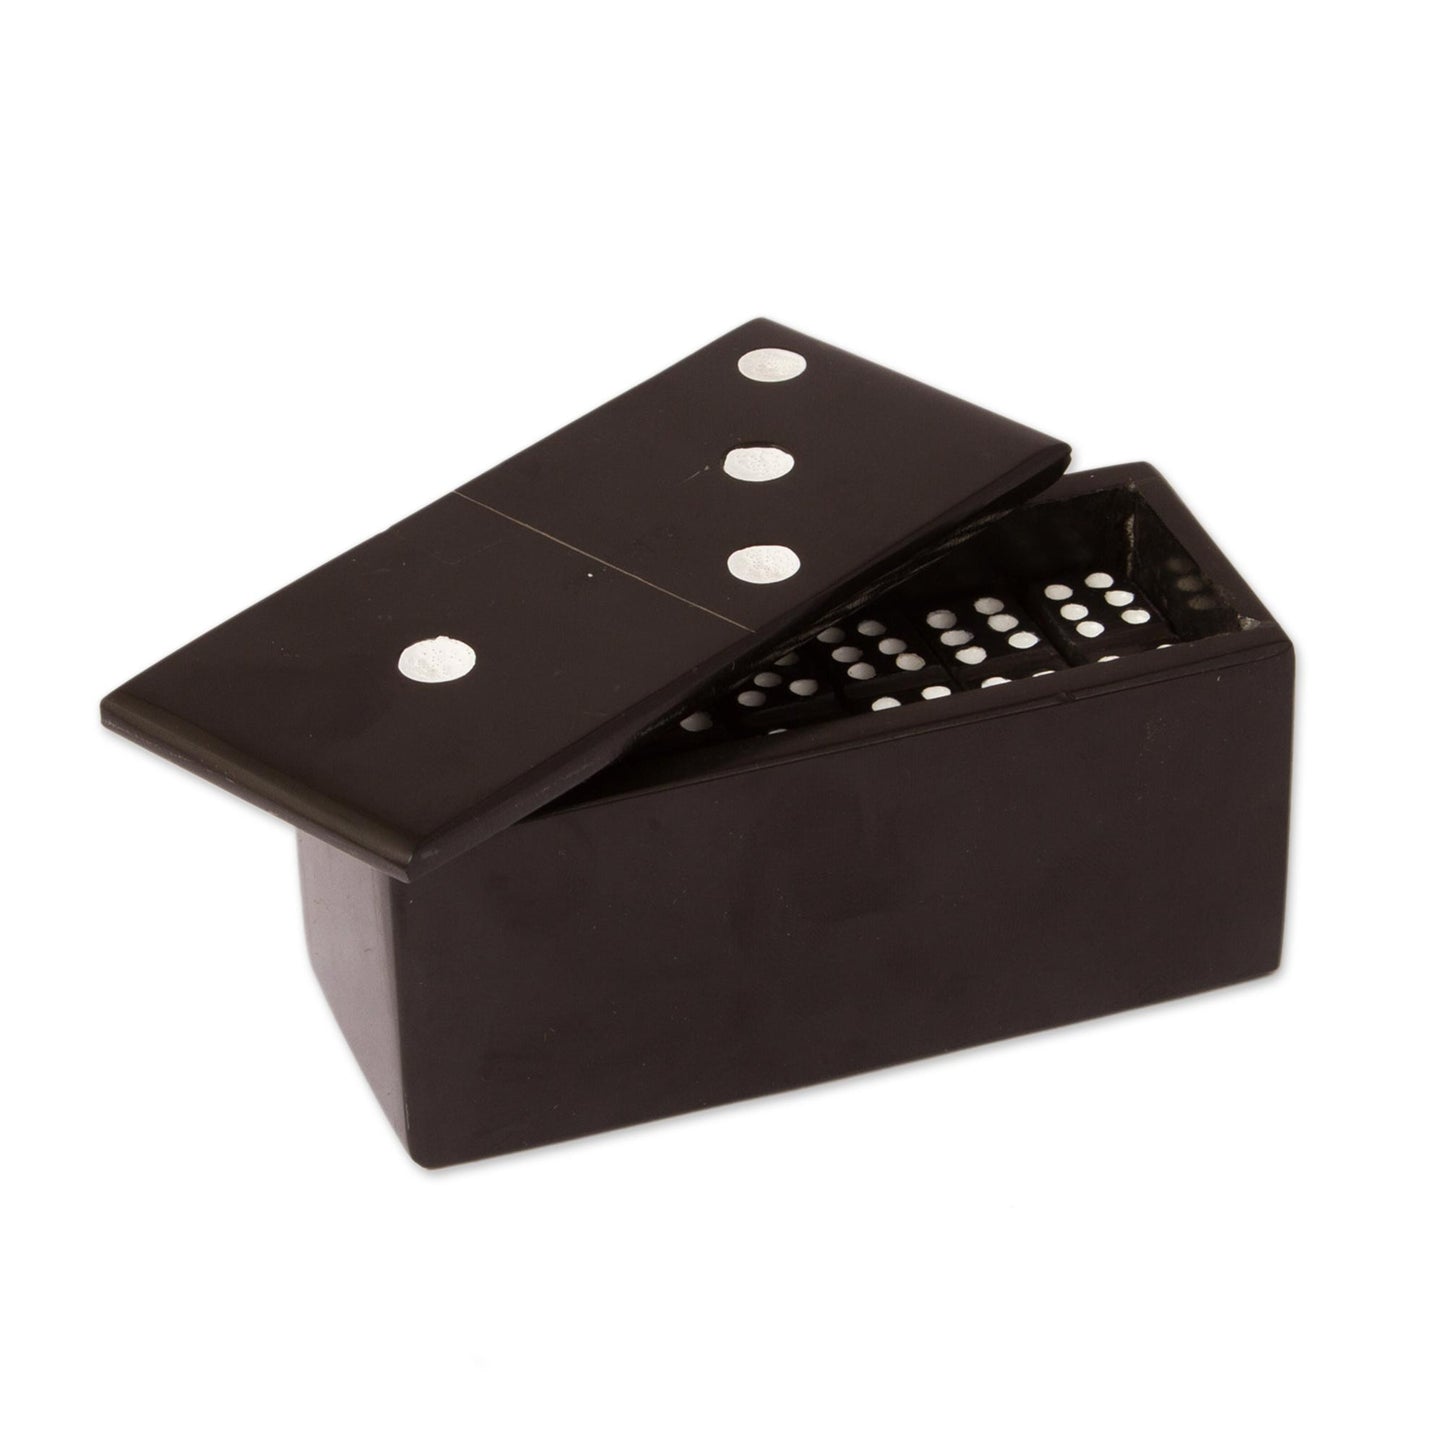 Strategic Chance Black Marble Domino Set from Mexico